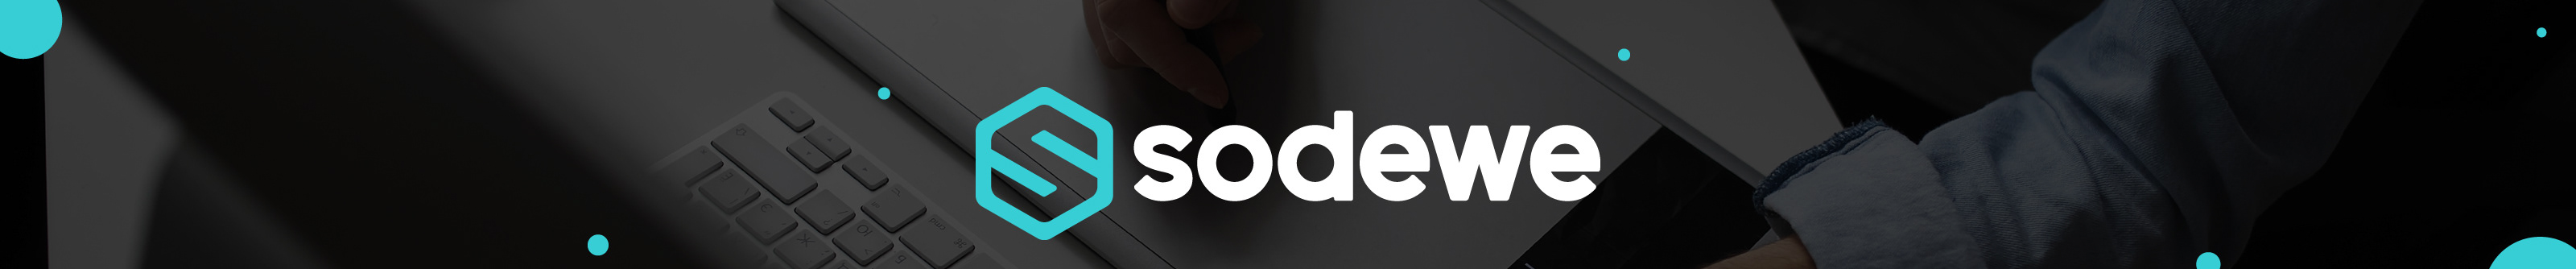 Sodewe Limited's profile banner